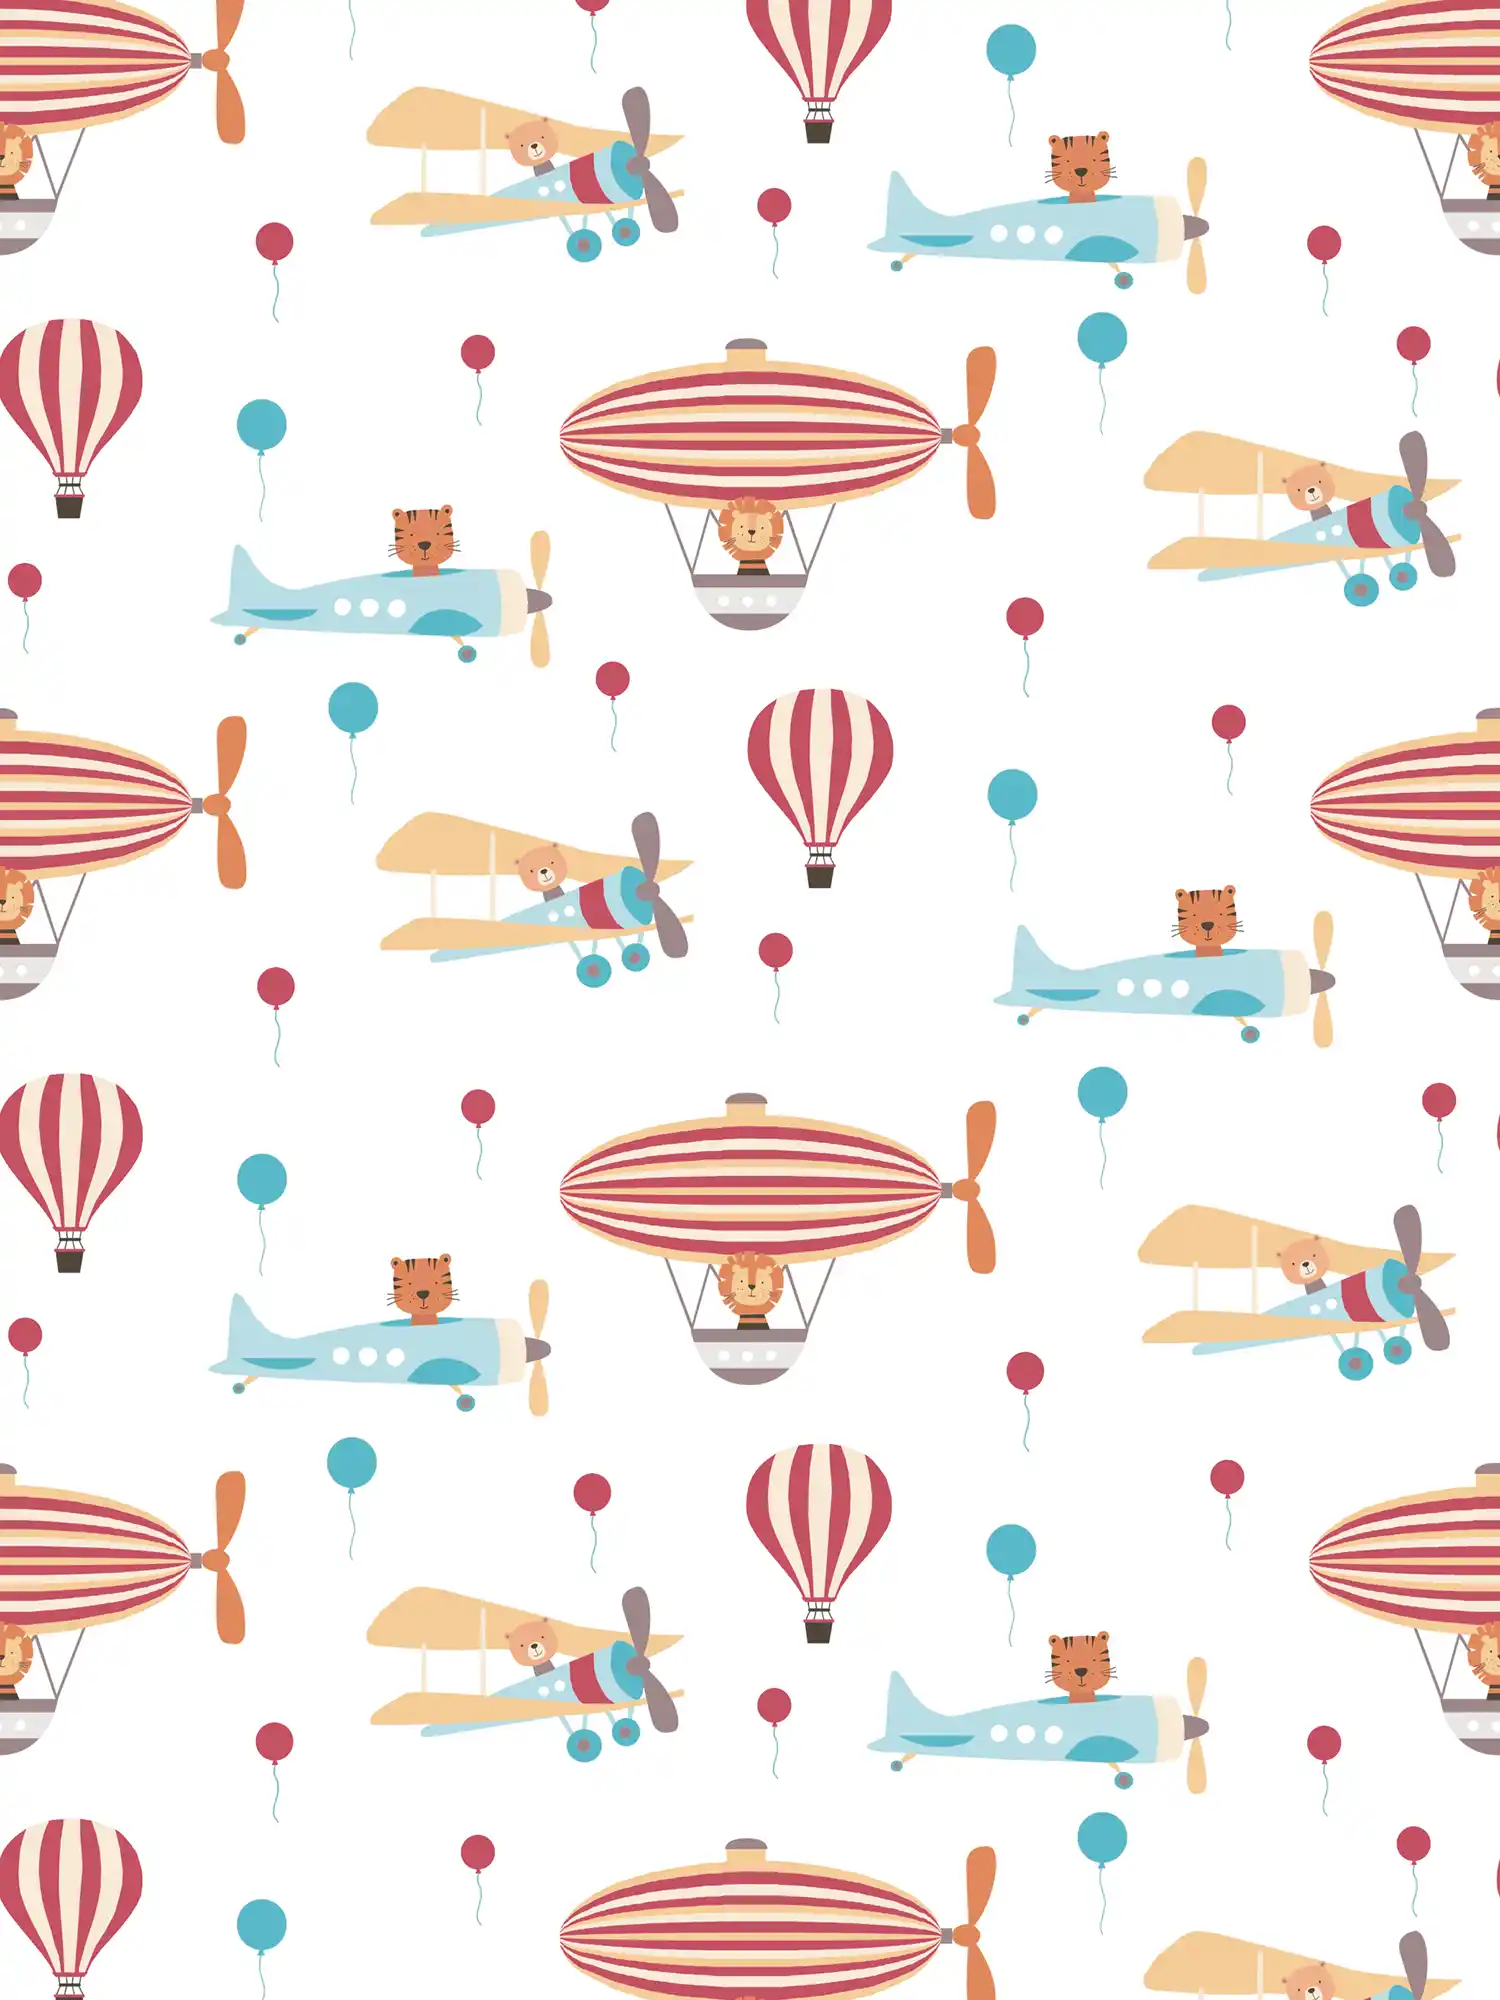 Nursery wallpaper airplane & balloons - colourful, red, blue
